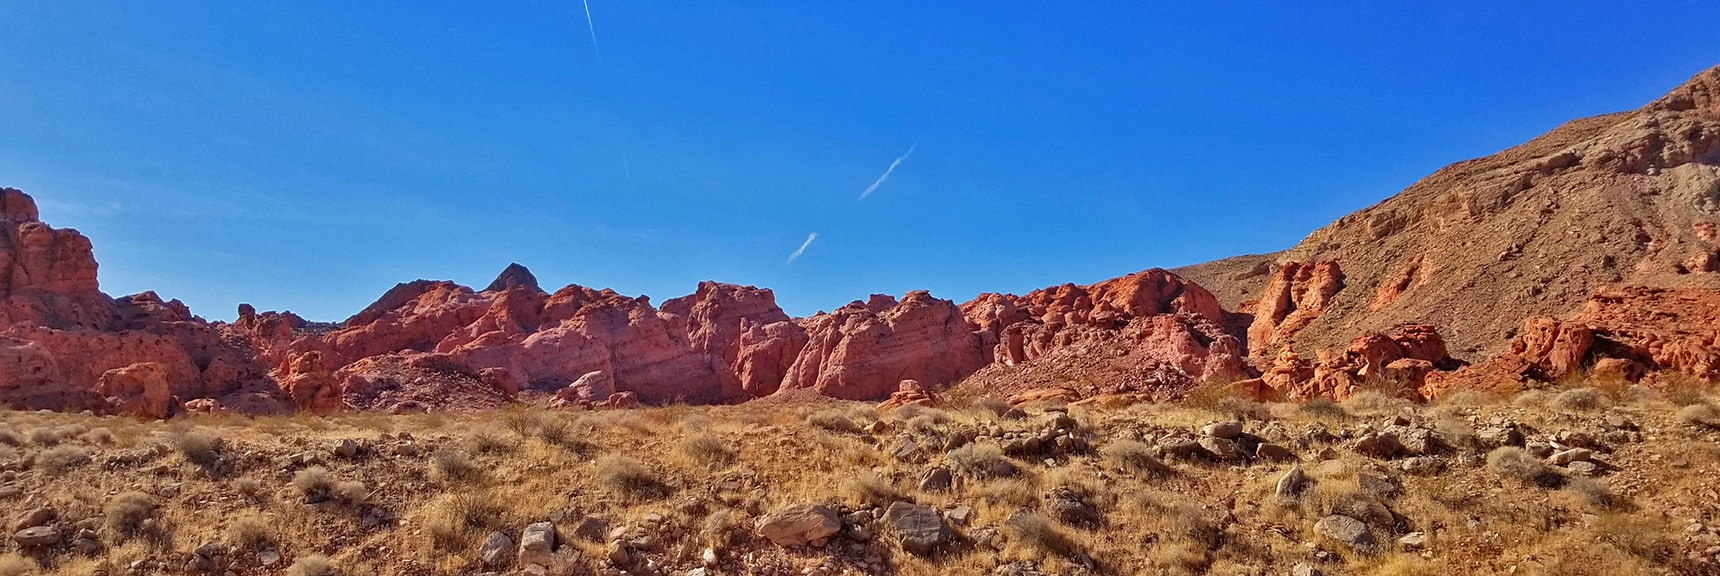 The Sand Dunes Were Sitting On Iron Rich Ground | Bowl of Fire, Lake Mead National Recreation Area, Nevada